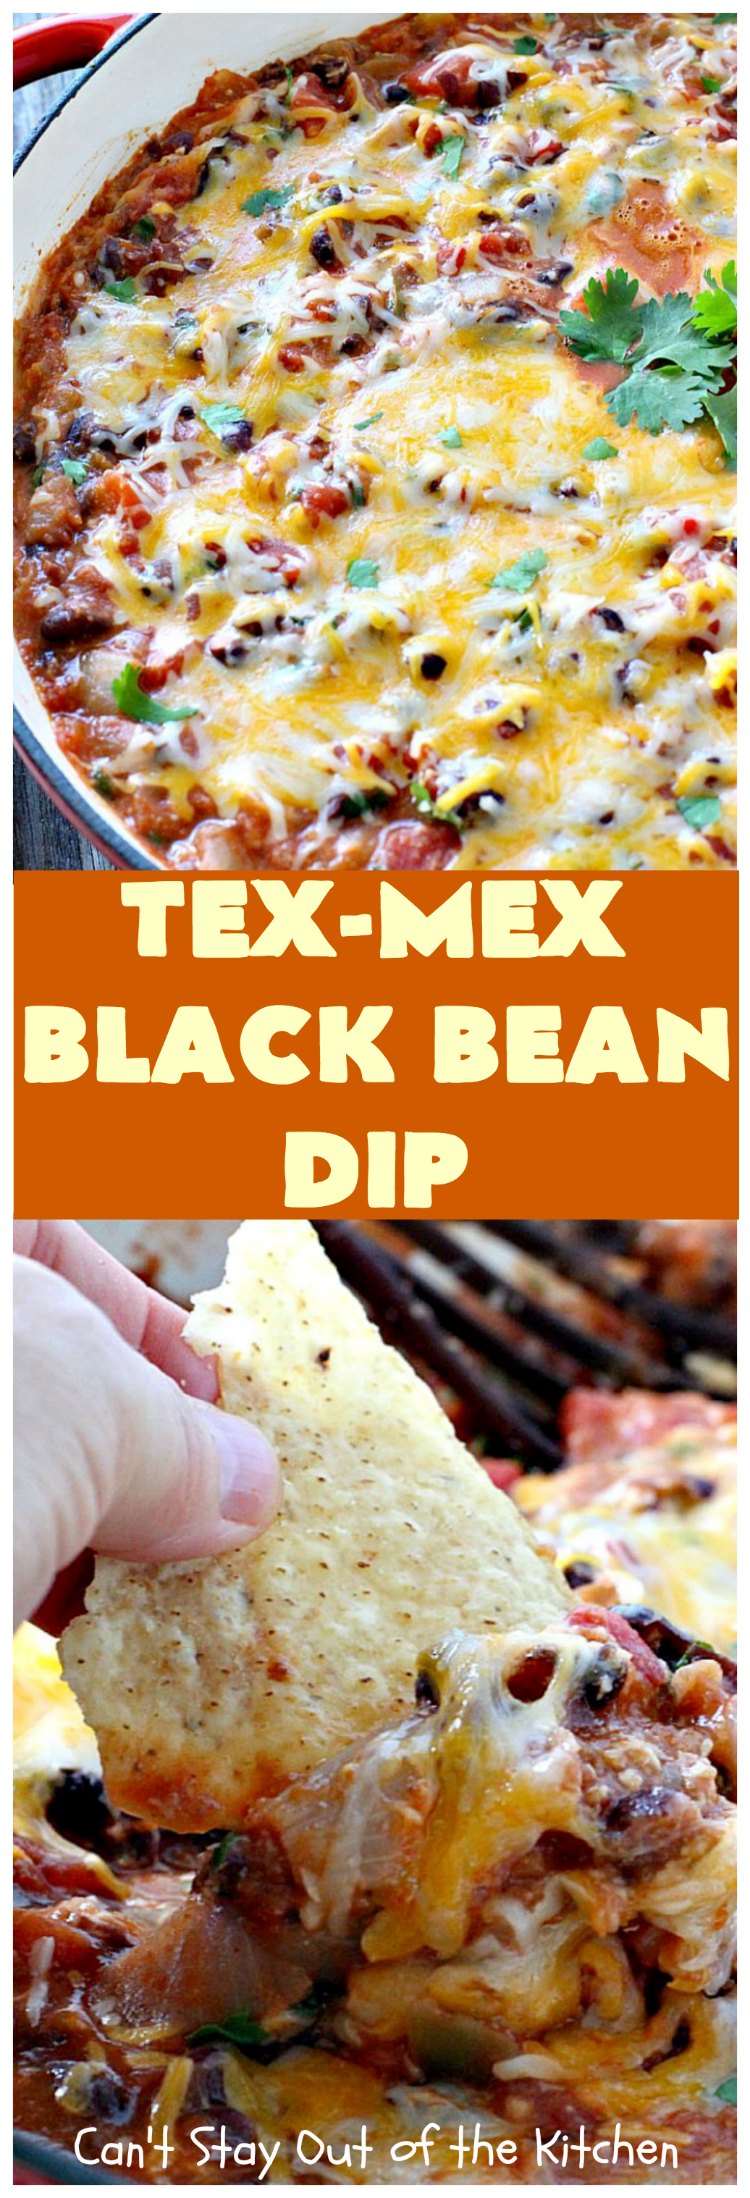 Tex-Mex Black Bean Dip | Can't Stay Out of the Kitchen